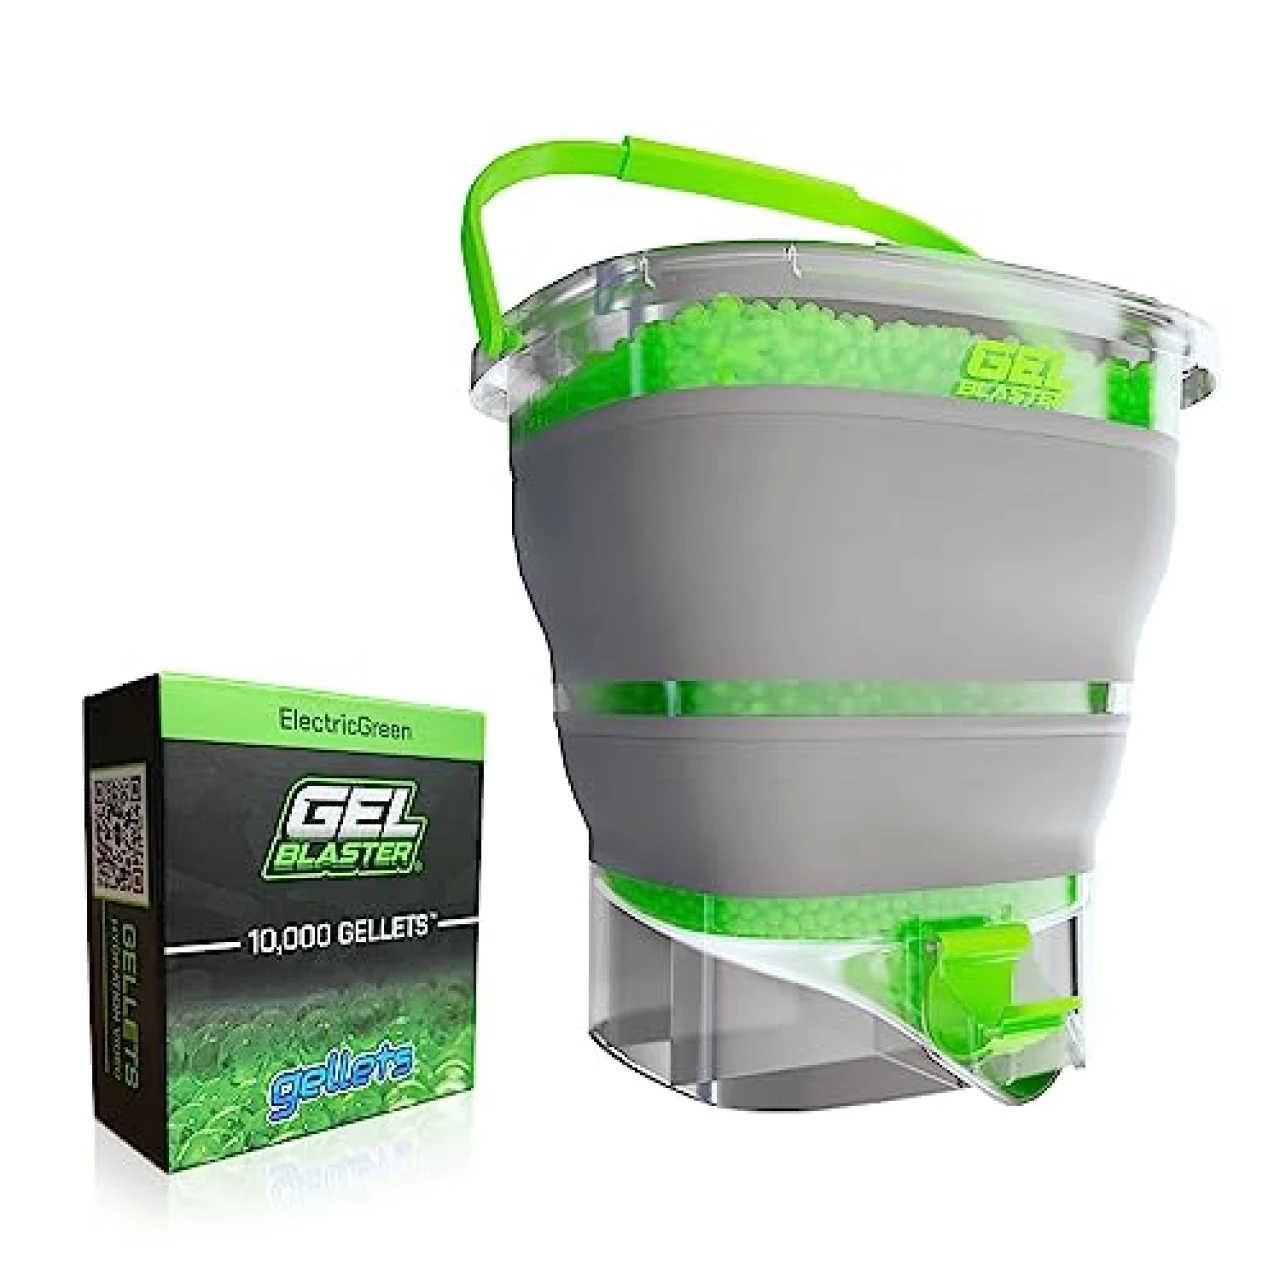 Gel Blaster Gellet Depot with 10,000 Gellets - Collapsible Ammo Tub - Fast Loading Nozzle &amp; Built-in Strainer - Hydrates &amp; Stores 10,000+ Gellets - Space Saving Design - Official Gel Blaster Accessory